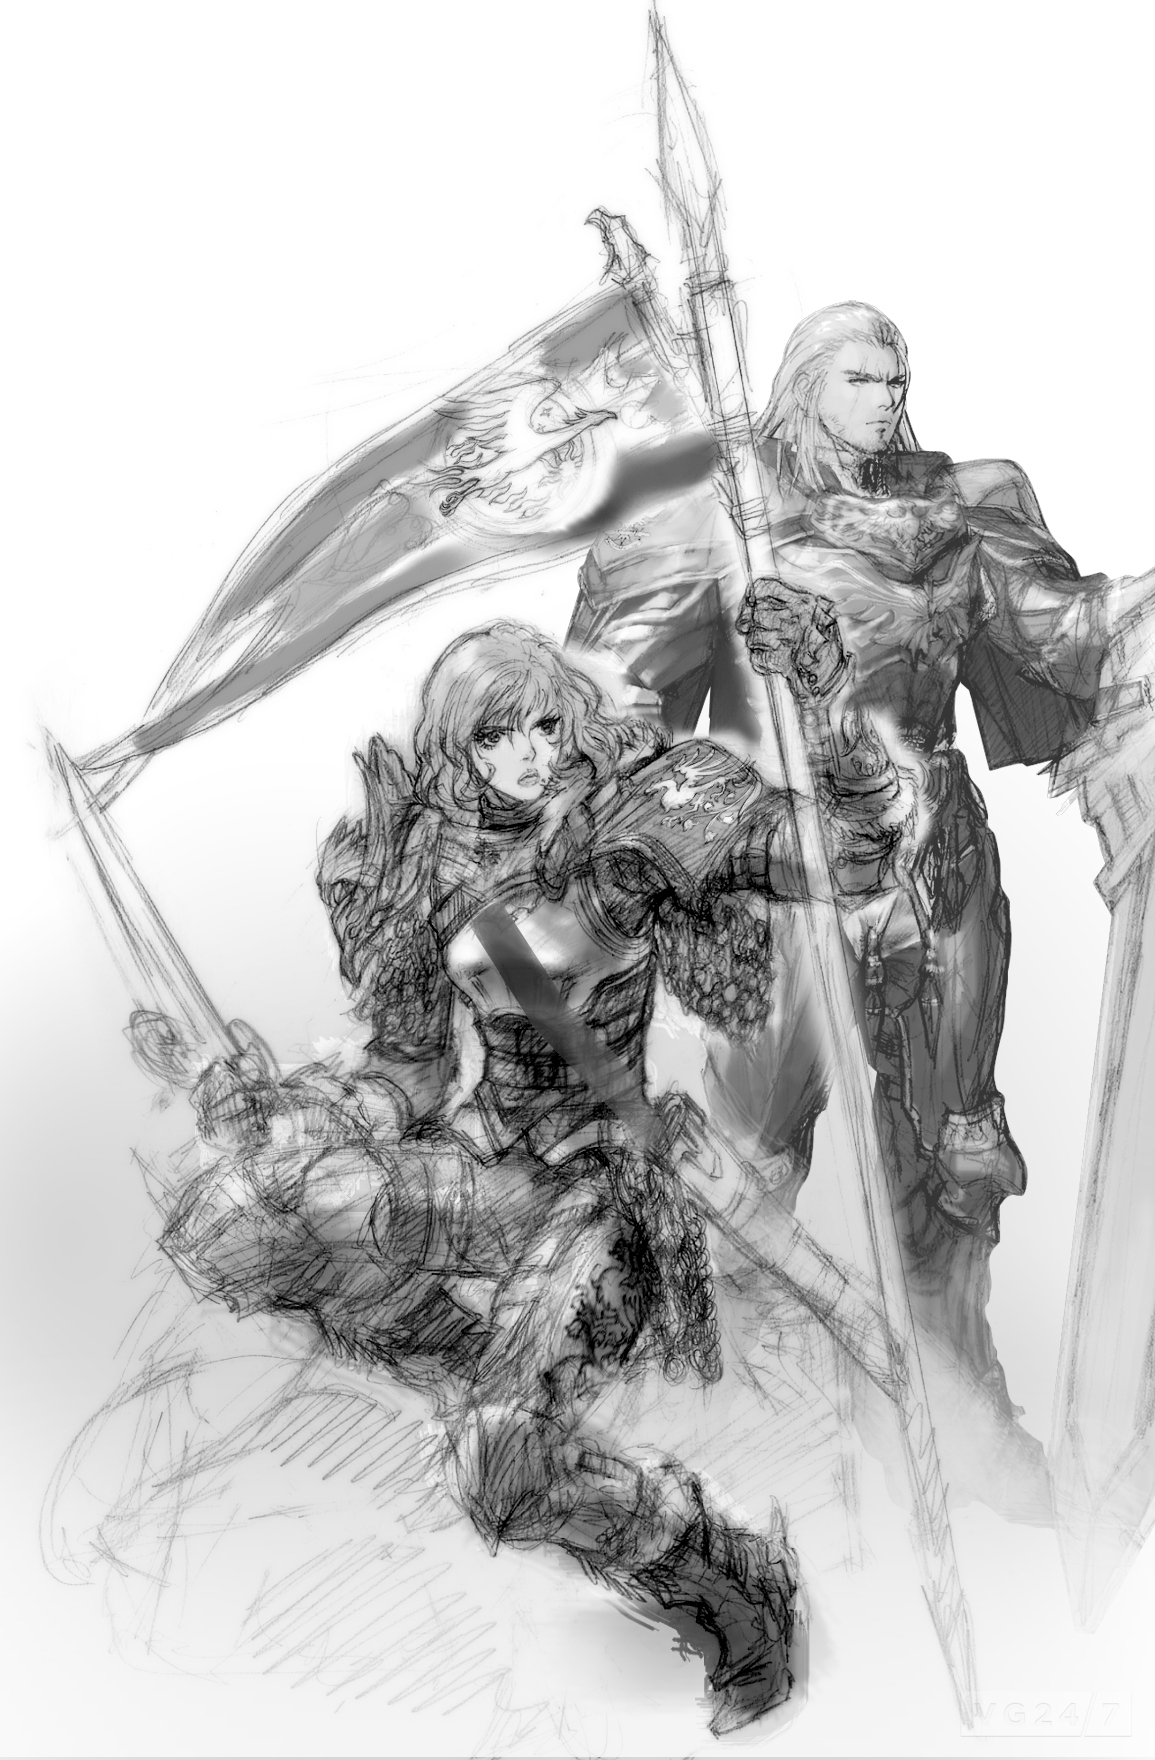 Character sketches of Hilde and Siegfried in SoulCalibur V